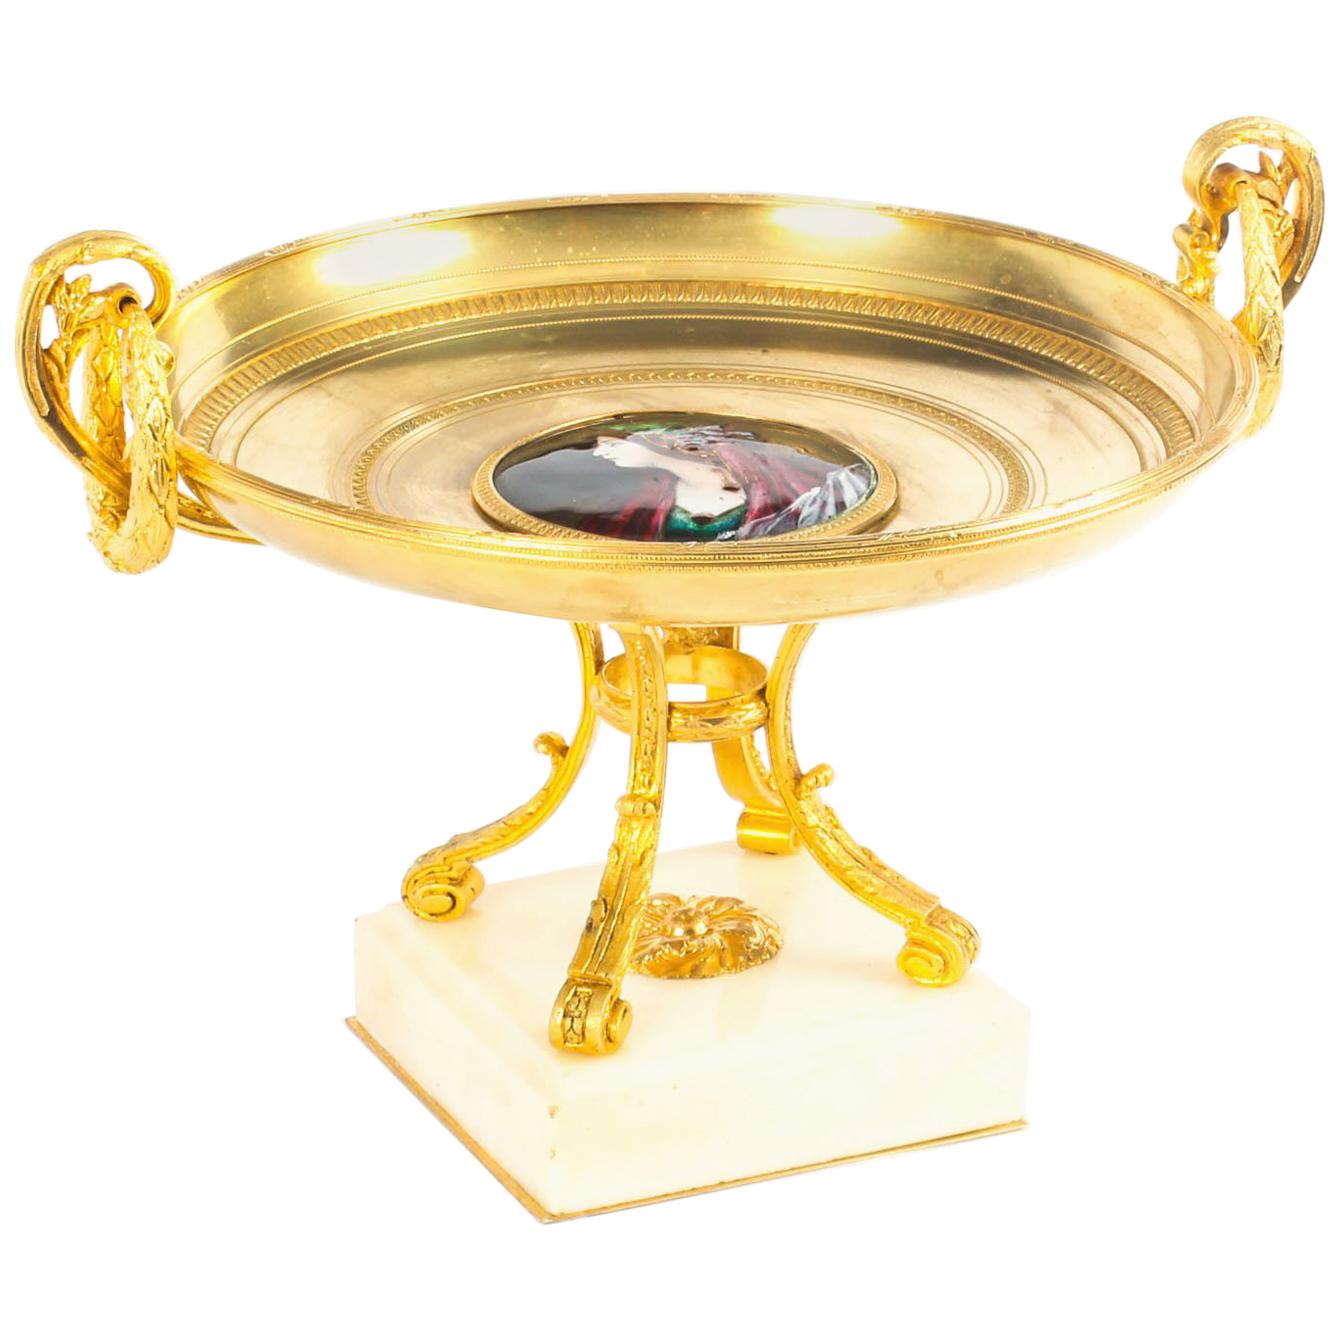 Antique French Ormolu Tazza with Limoges Enamel Plaque, 19th Century